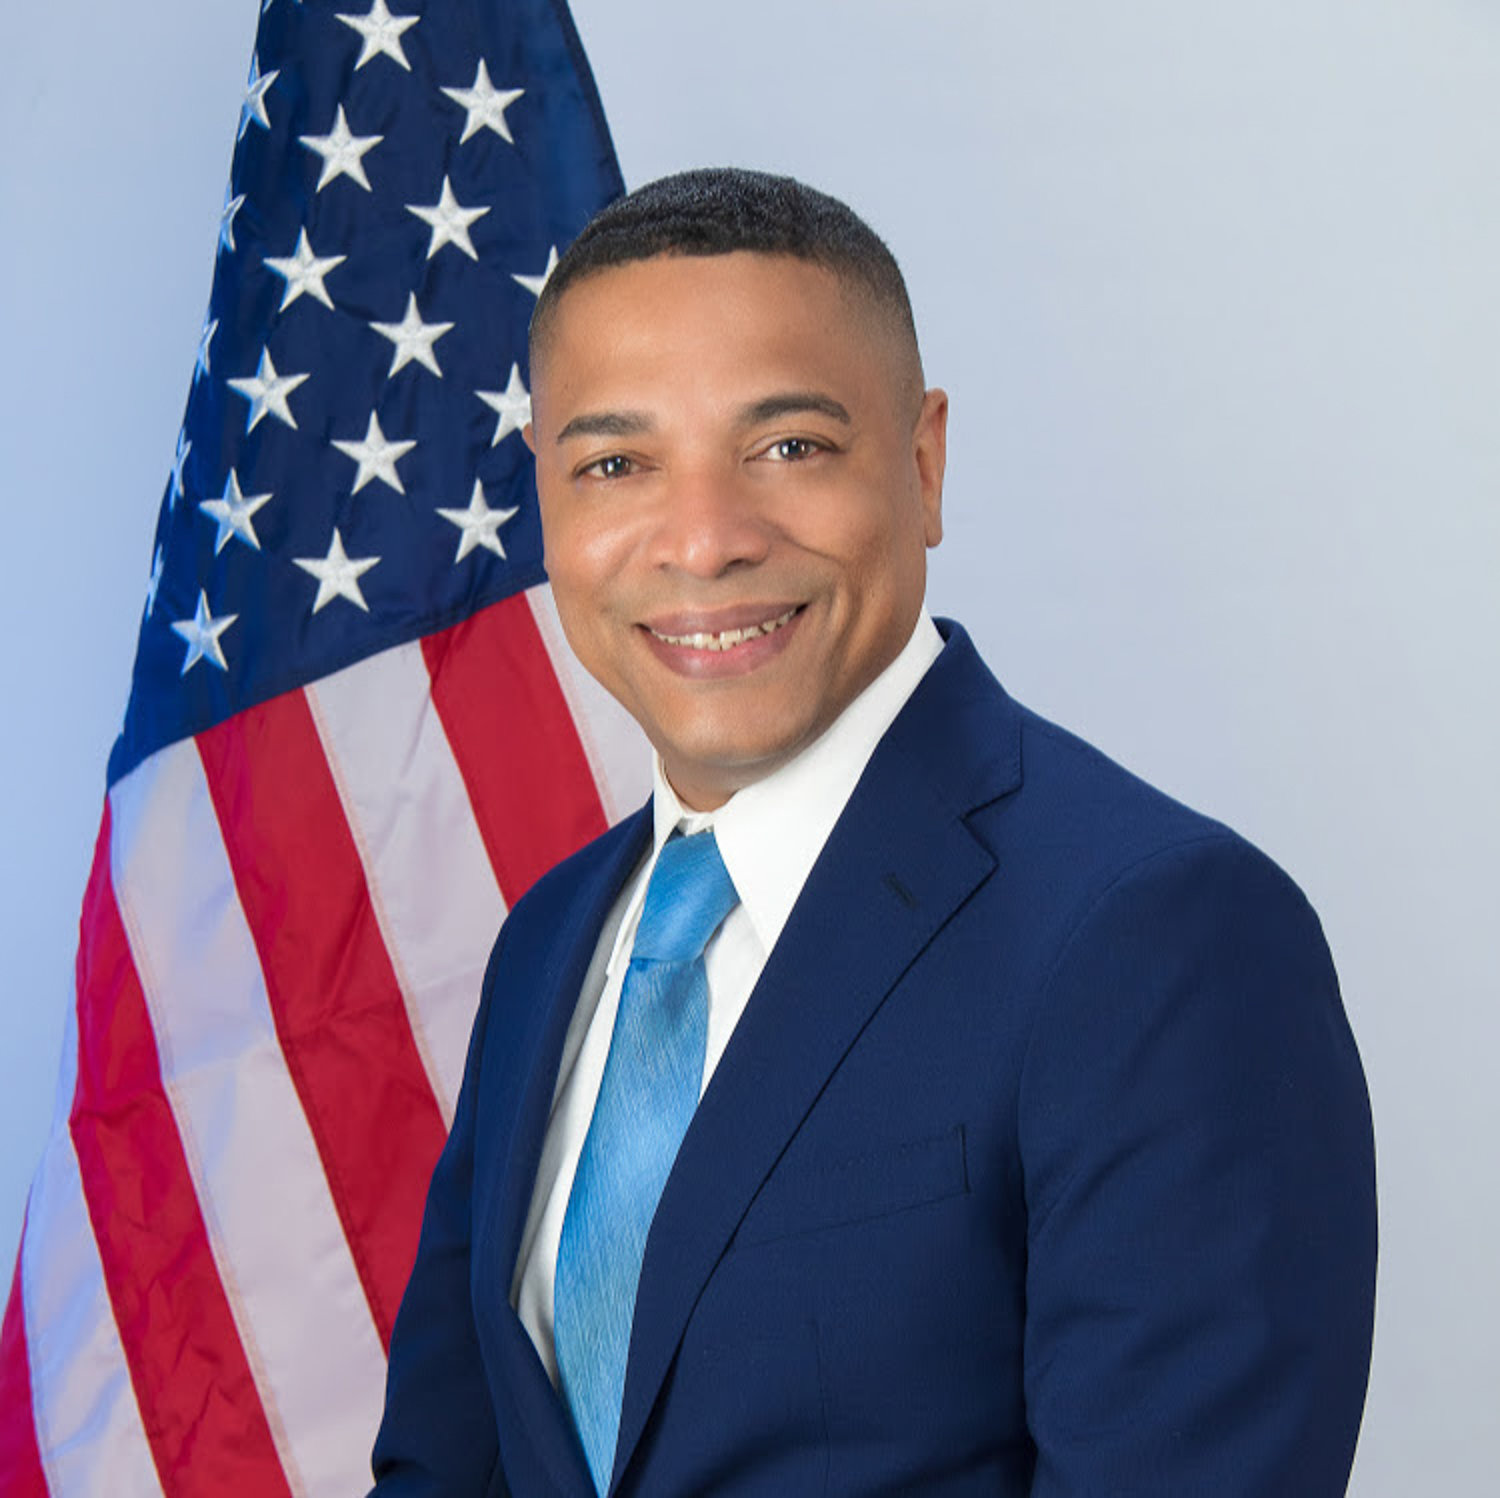 Sammy Ravelo is new to running for political office, having previously served in the U.S. Navy and spending time as an officer with the New York Police Department. He’s hoping to unseat U.S. Rep. Eliot Engel in the upcoming Democratic primary.